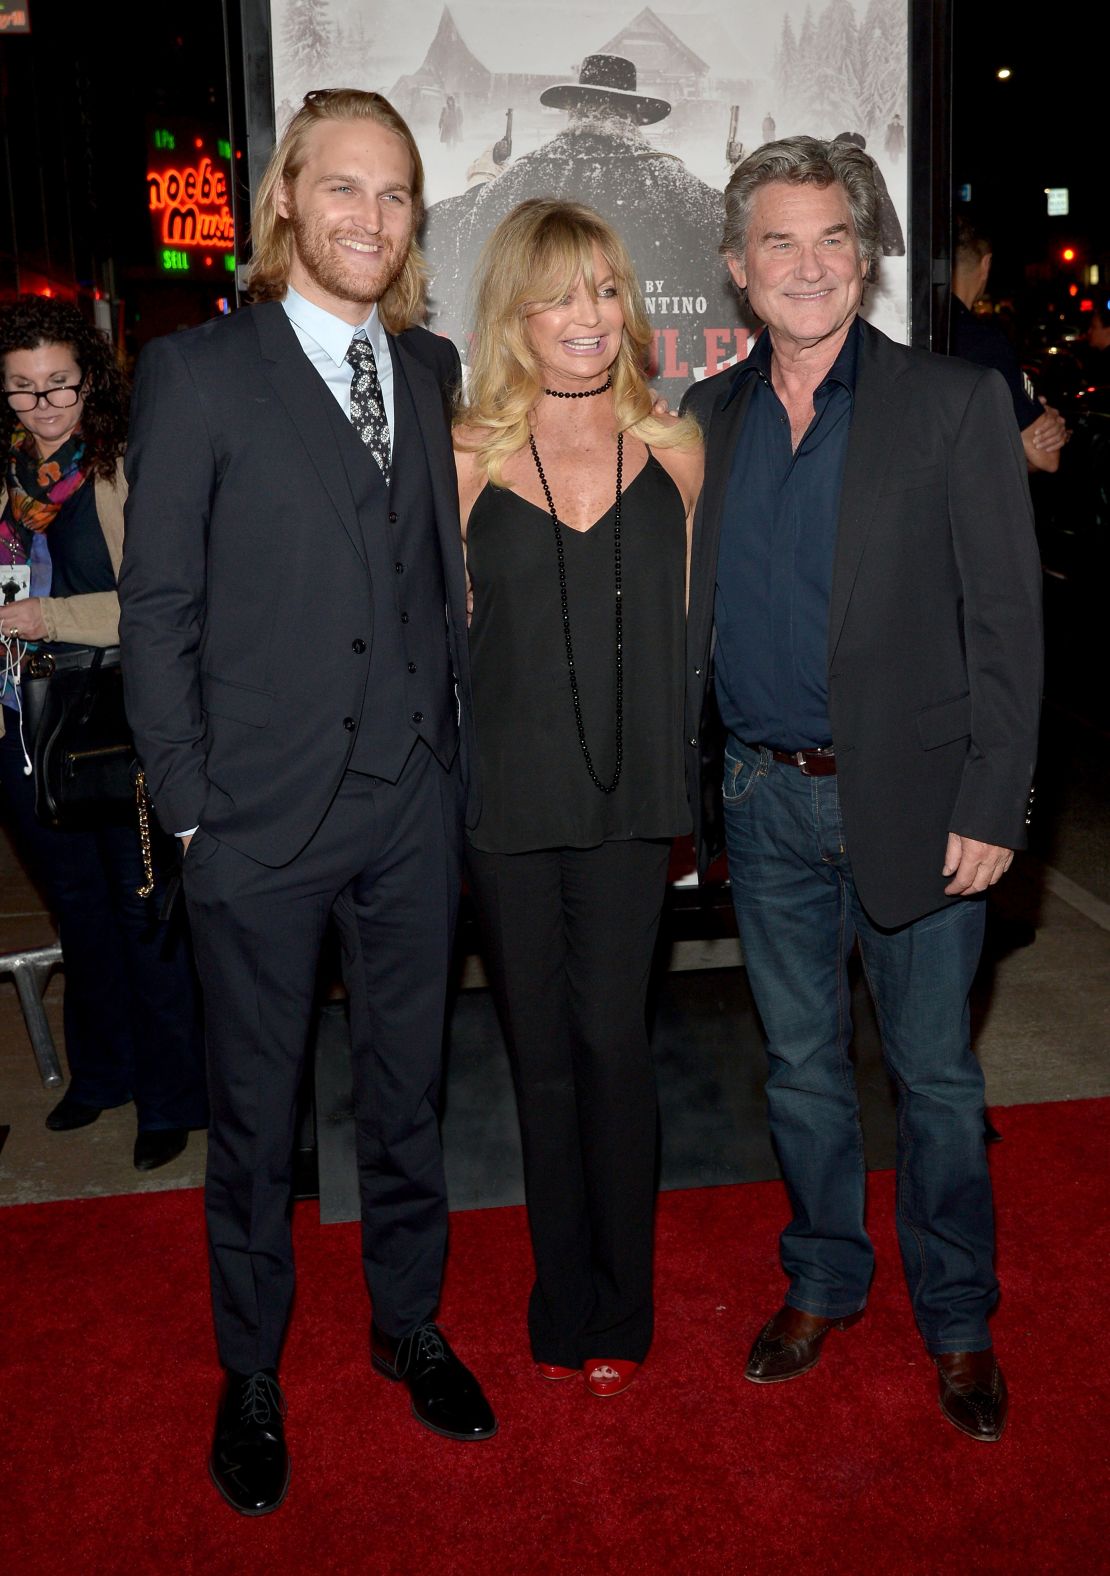 Wyatt Russell, Goldie Hawn, and Kurt Russell at a premiere in 2015